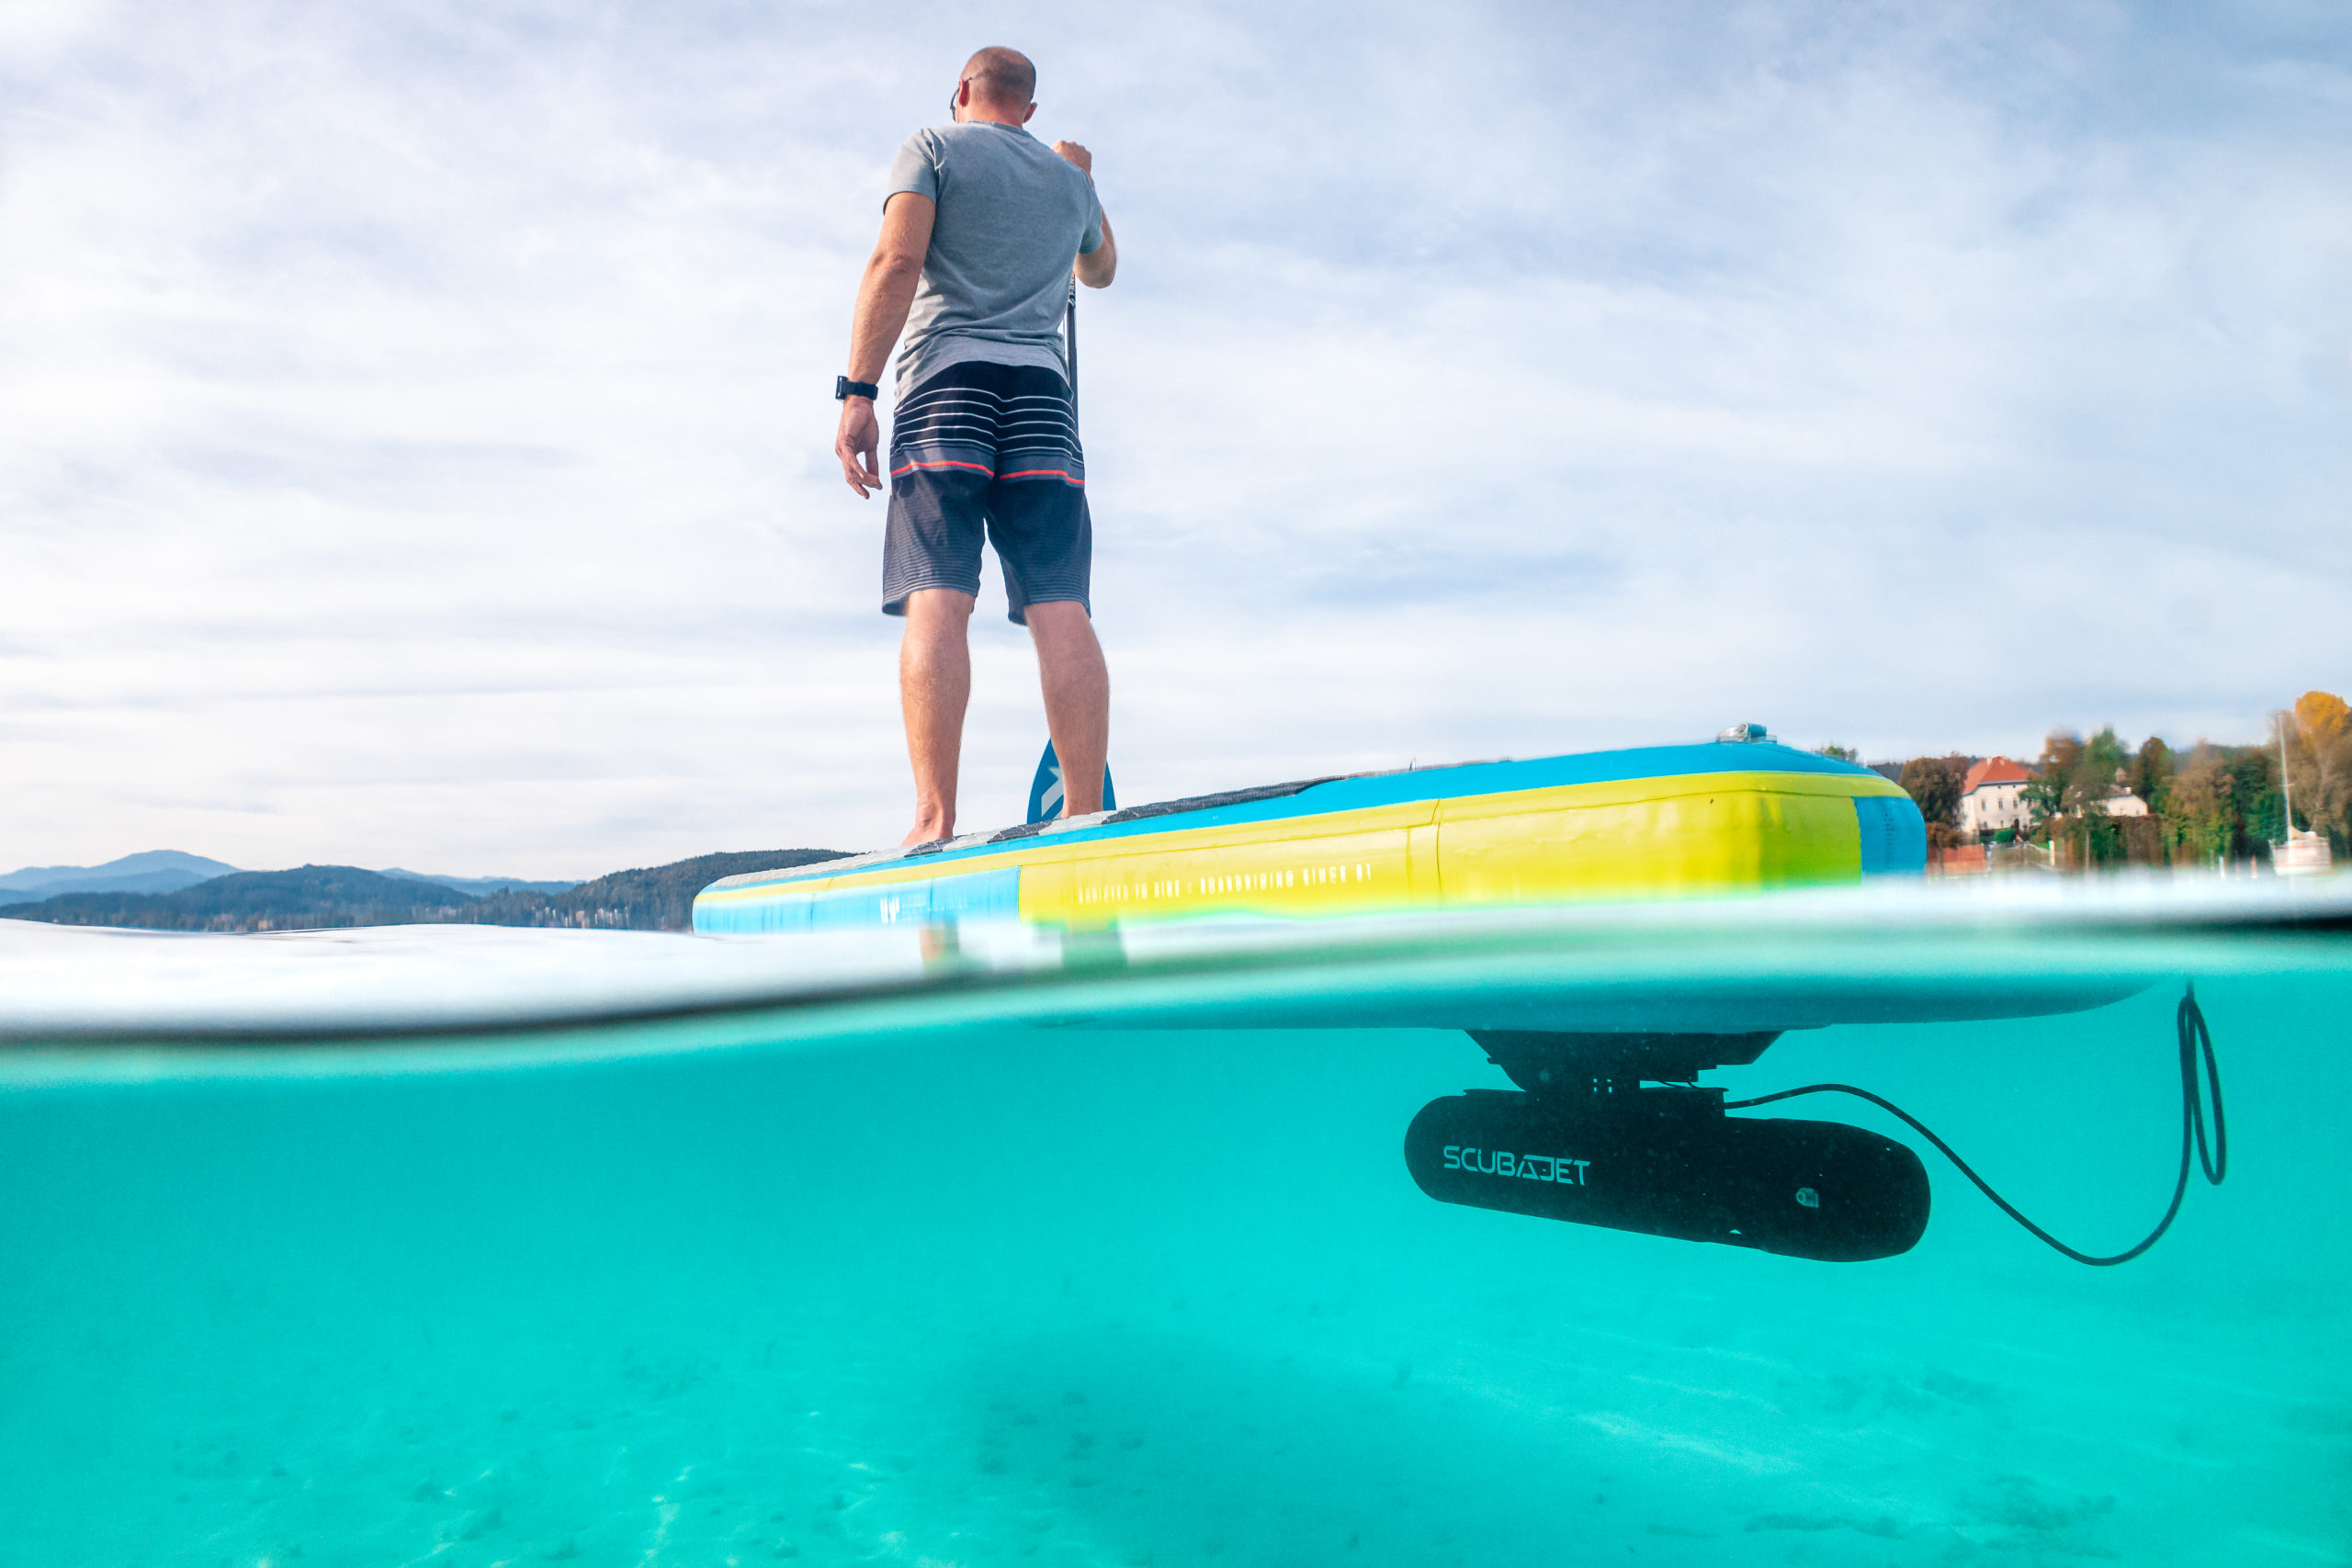 Stand up paddler on SUP with a SCUBAJET attachedd